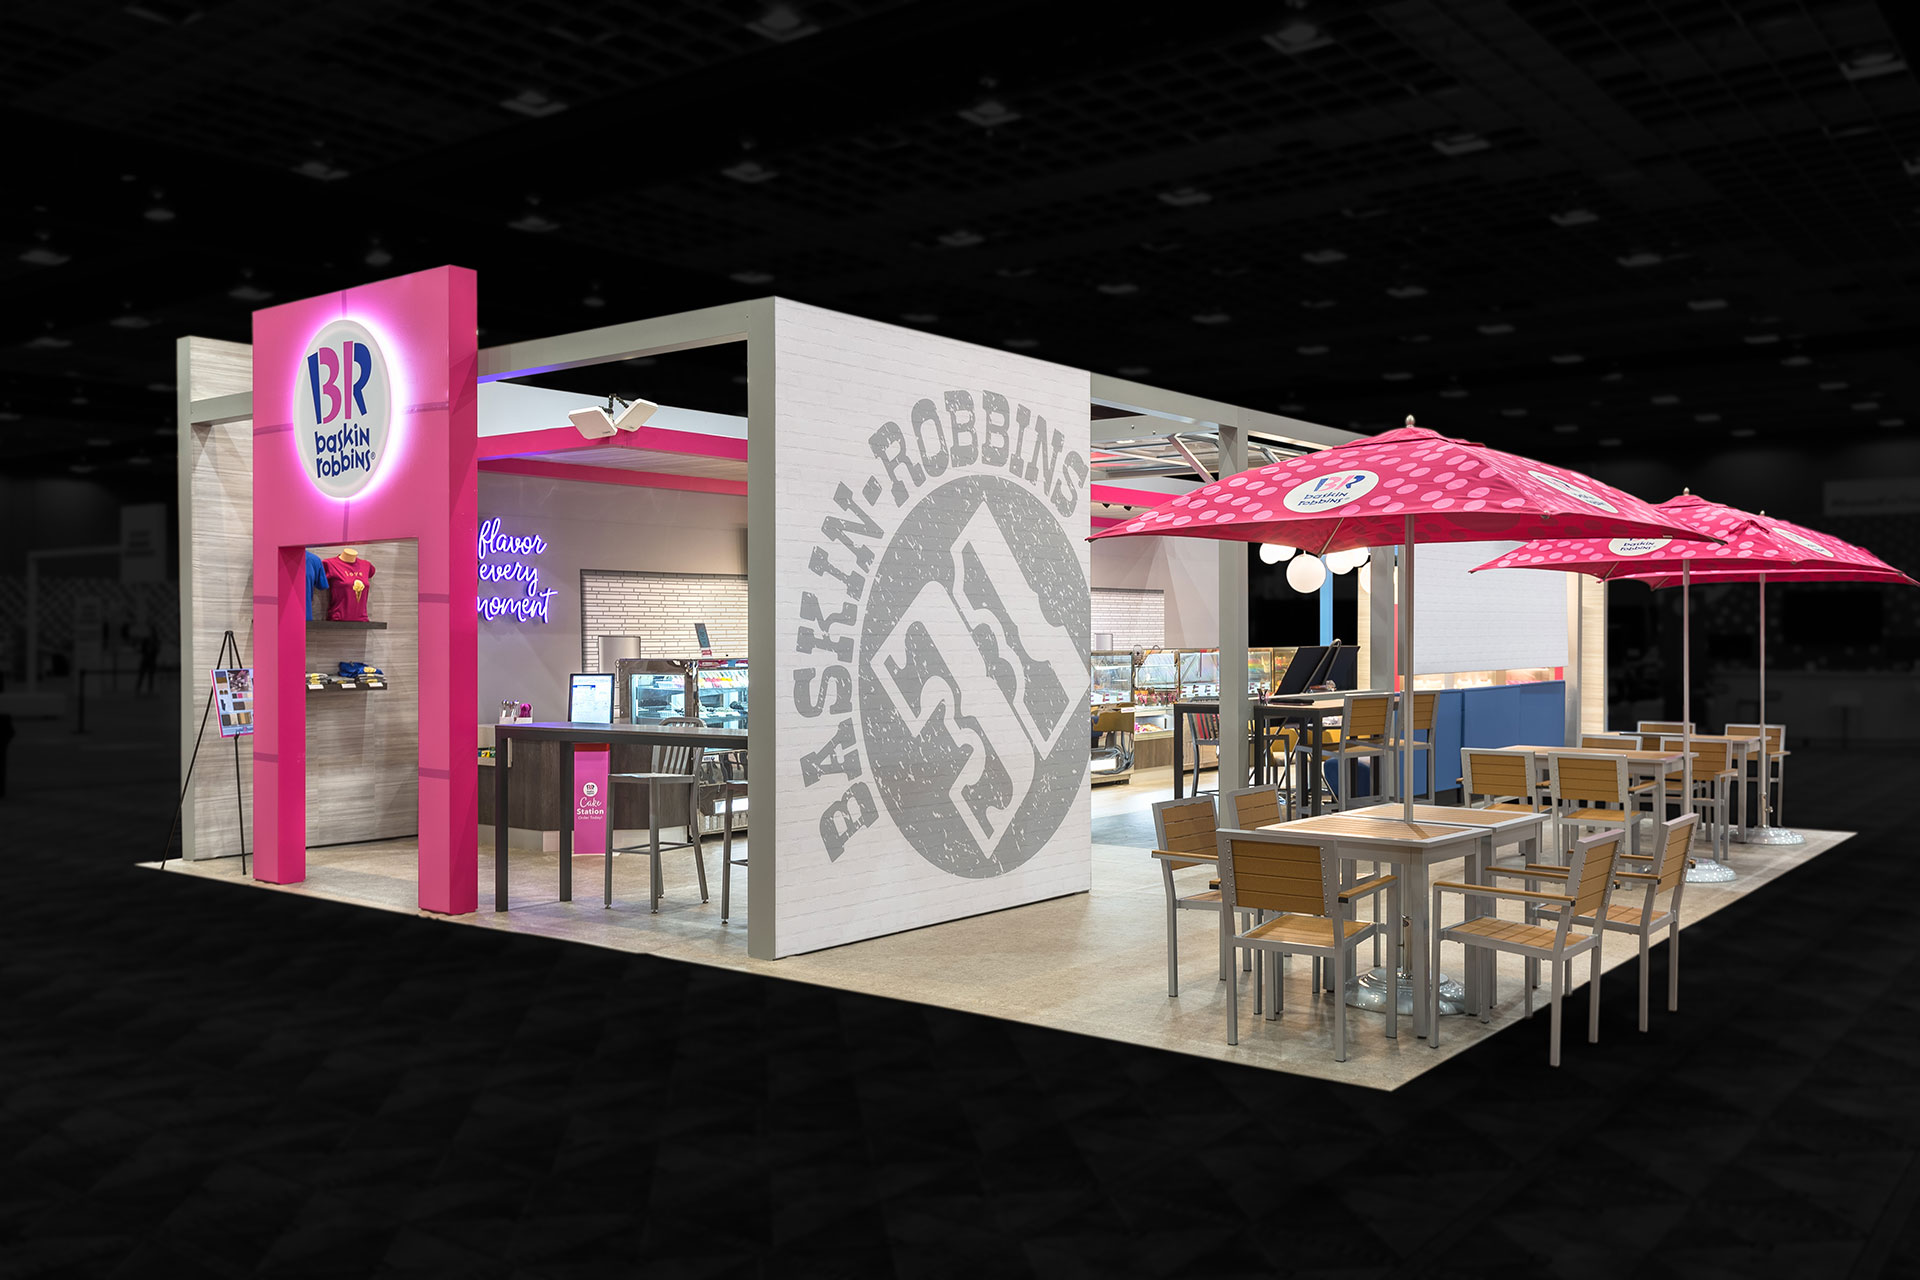 A Baskin Robbins store as a trade show exhibit with a pink arch and logo screen left, a white wall with grey printed logo centered, and tables with pink umbrellas screen right and the interior display cases and counters visible.